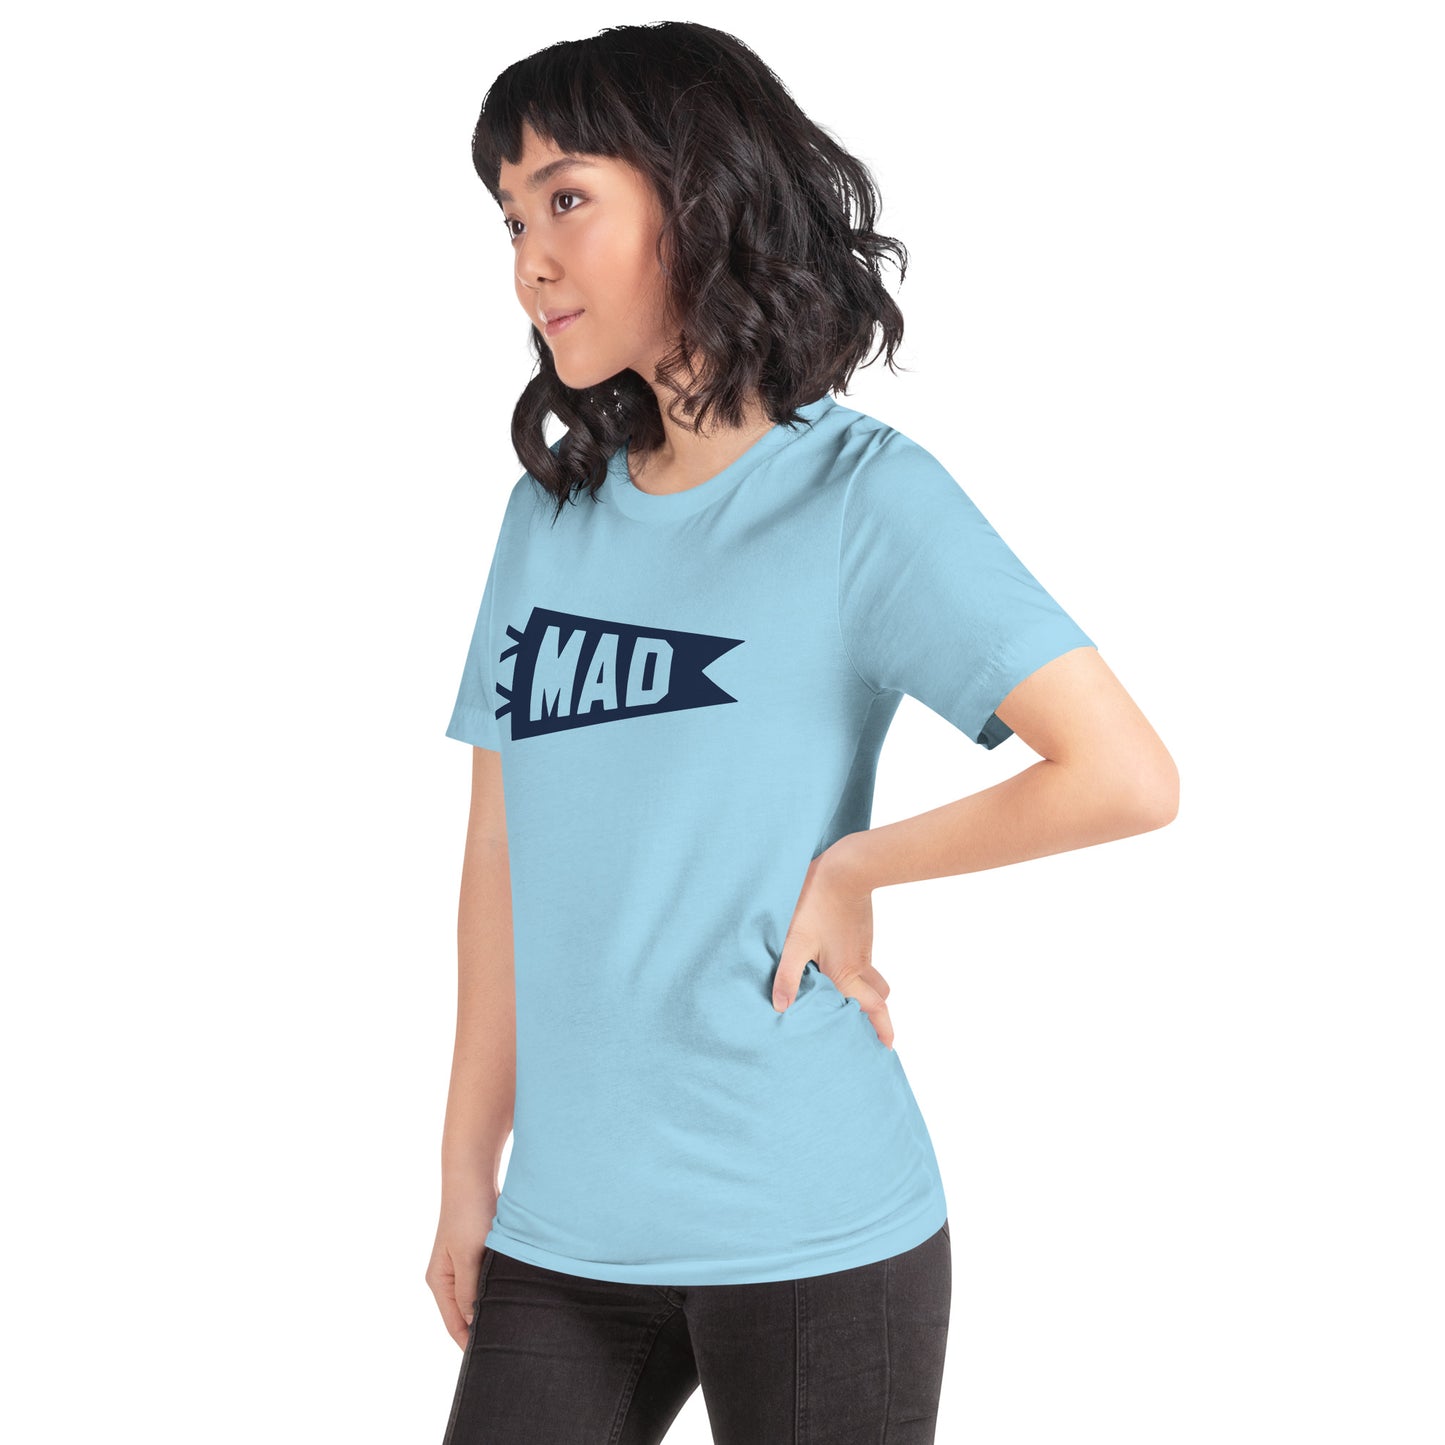 Airport Code T-Shirt - Navy Blue Graphic • MAD Madrid • YHM Designs - Image 08